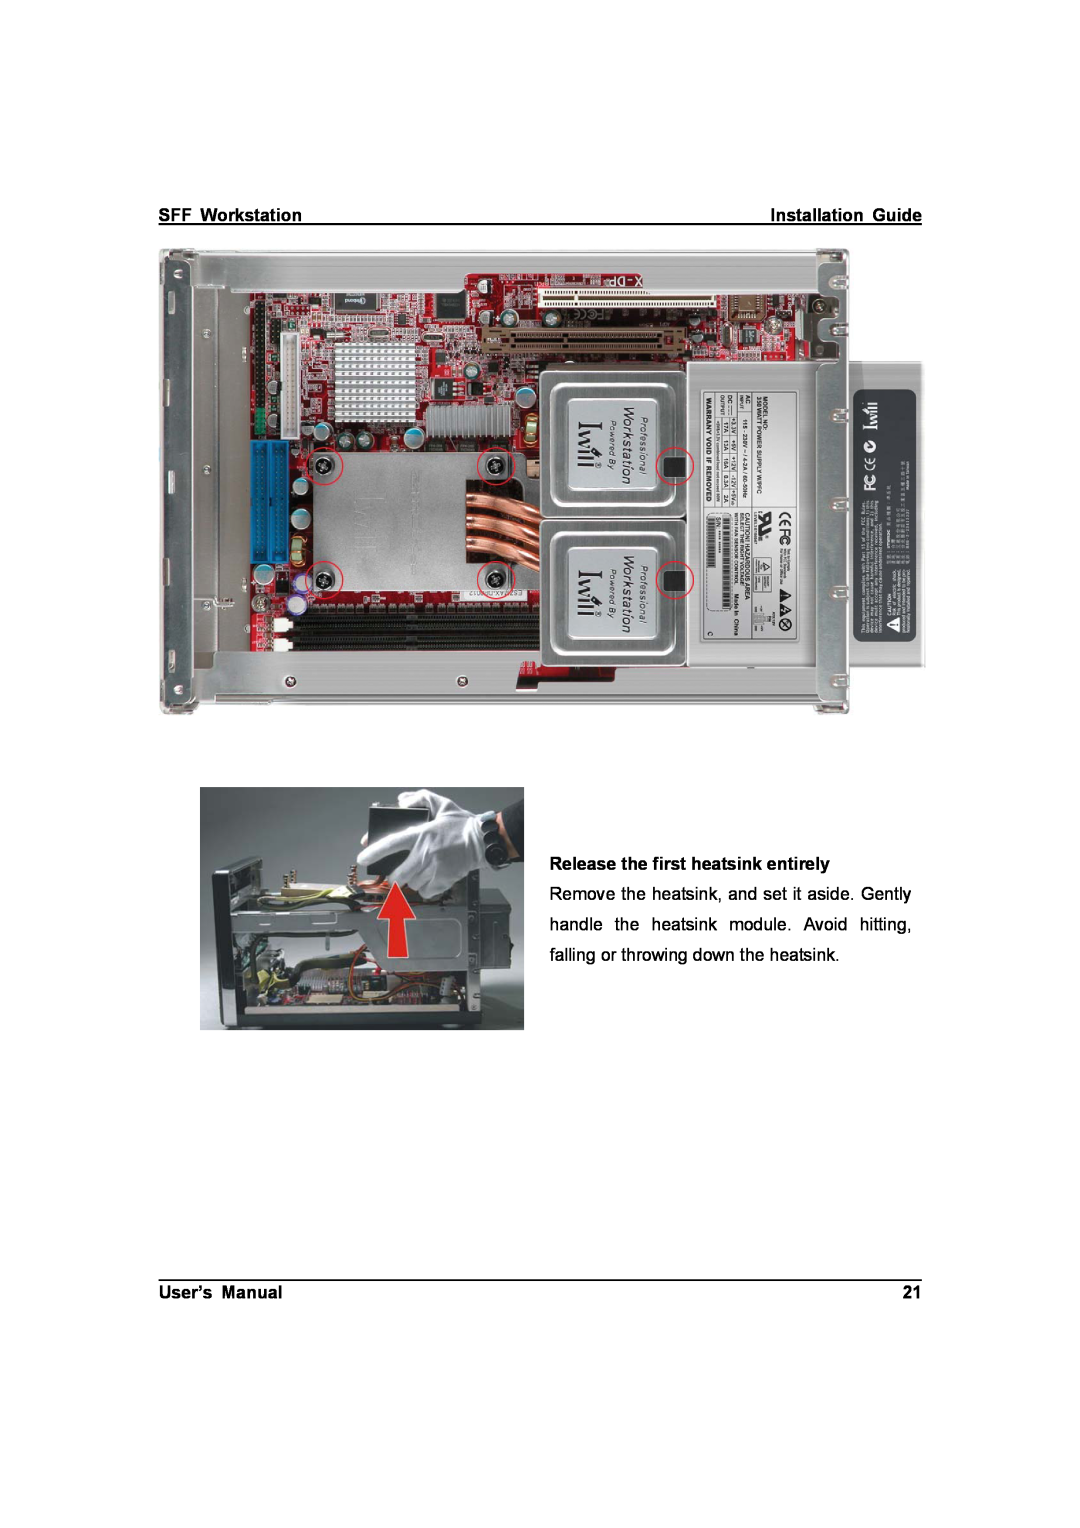 IBM ZMAXdp user manual SFF Workstation, Release the first heatsink entirely, User’s Manual, Installation Guide 